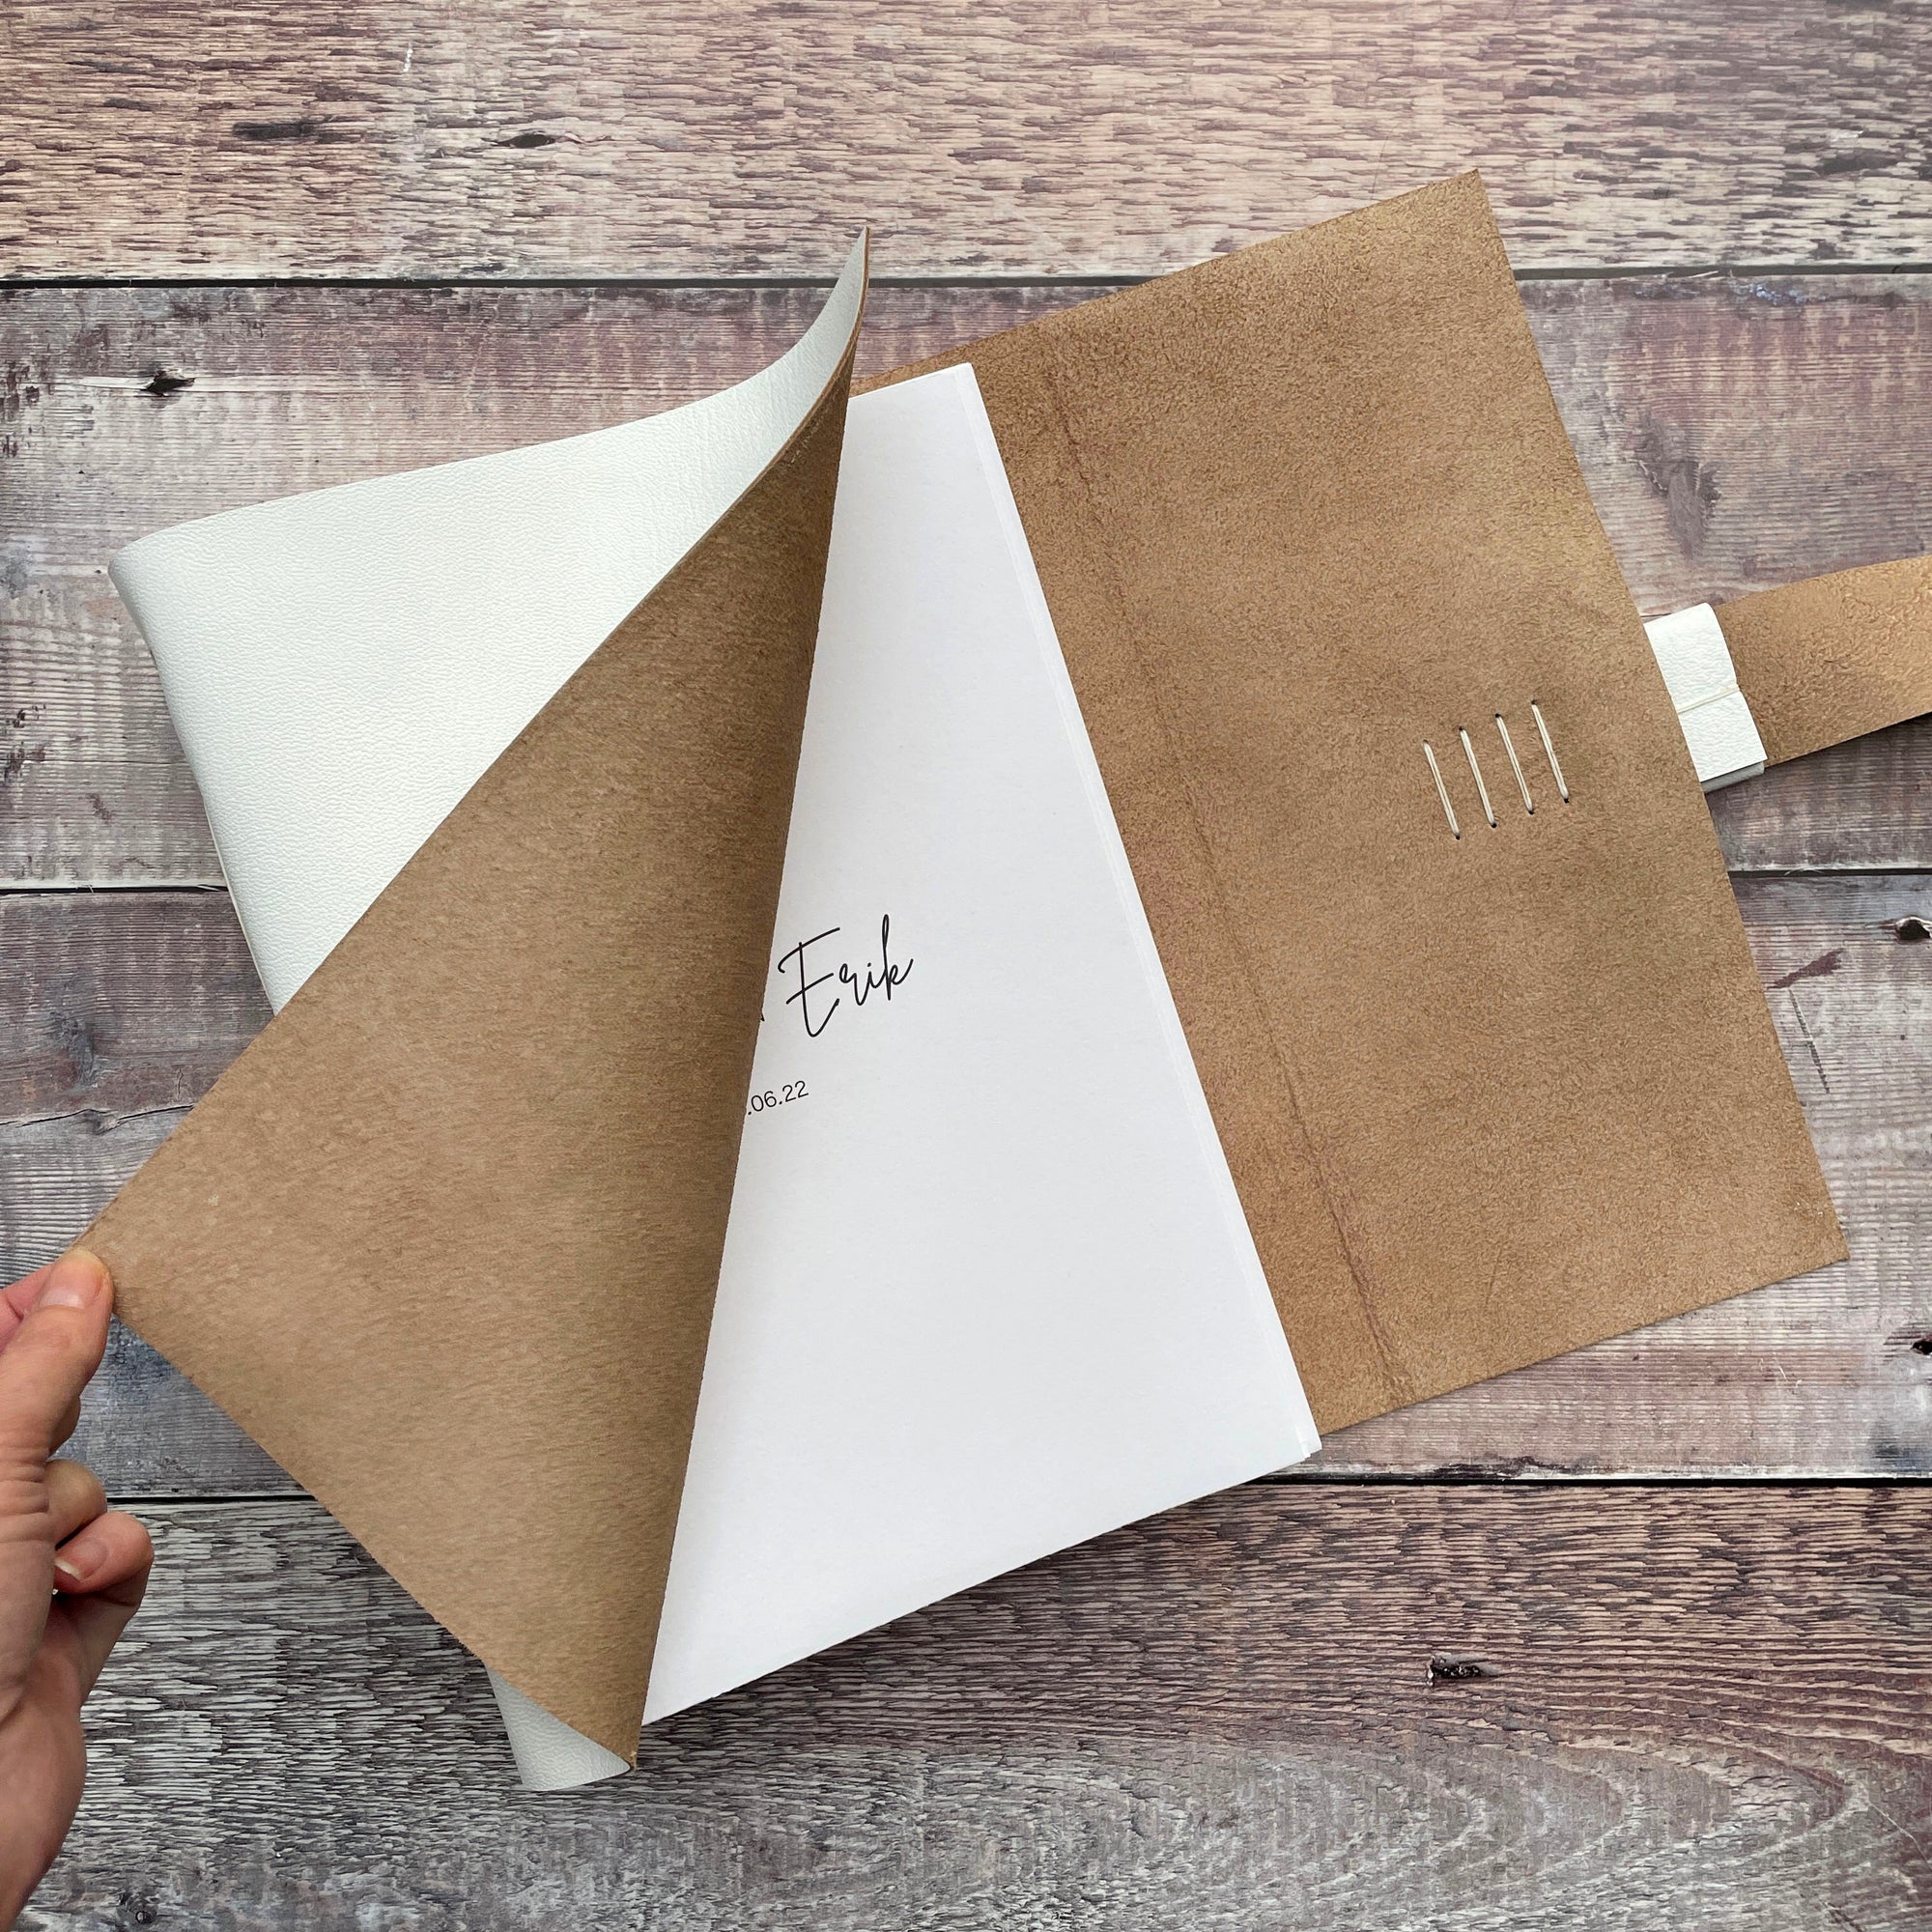 Personalised Wedding Guest Book bound by hand in white leather, A4 large portrait